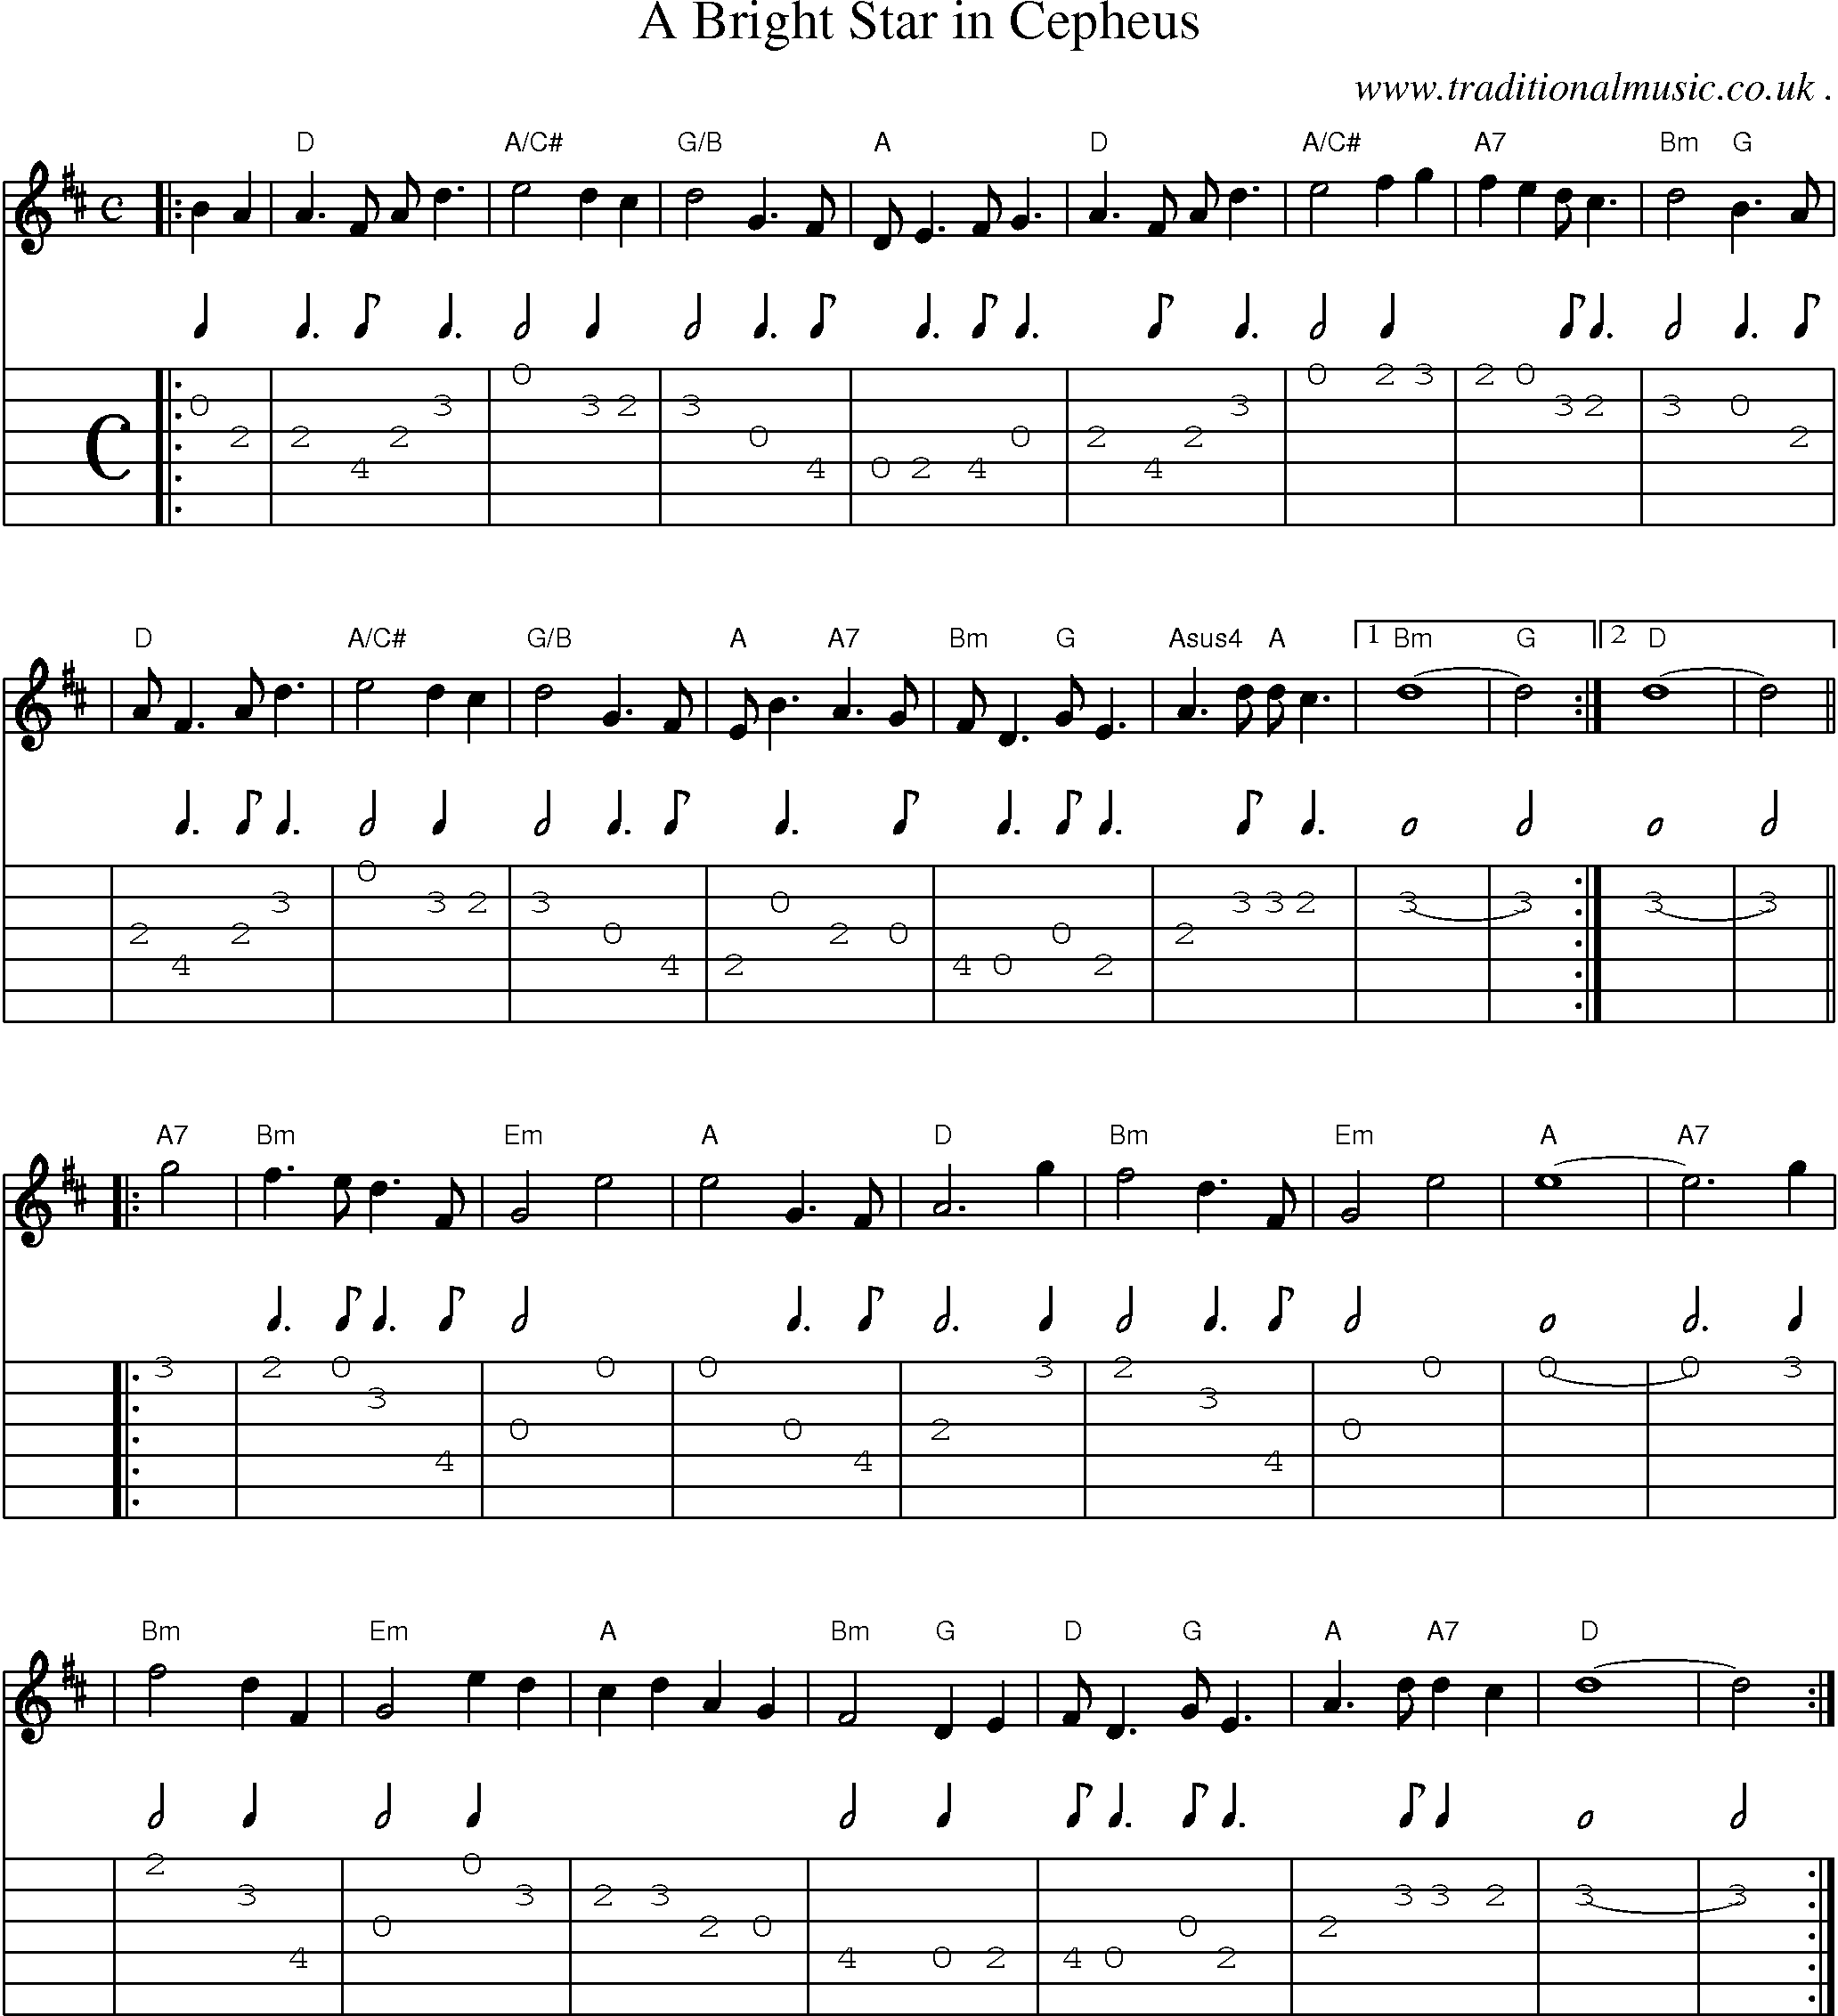 Sheet-music  score, Chords and Guitar Tabs for A Bright Star In Cepheus